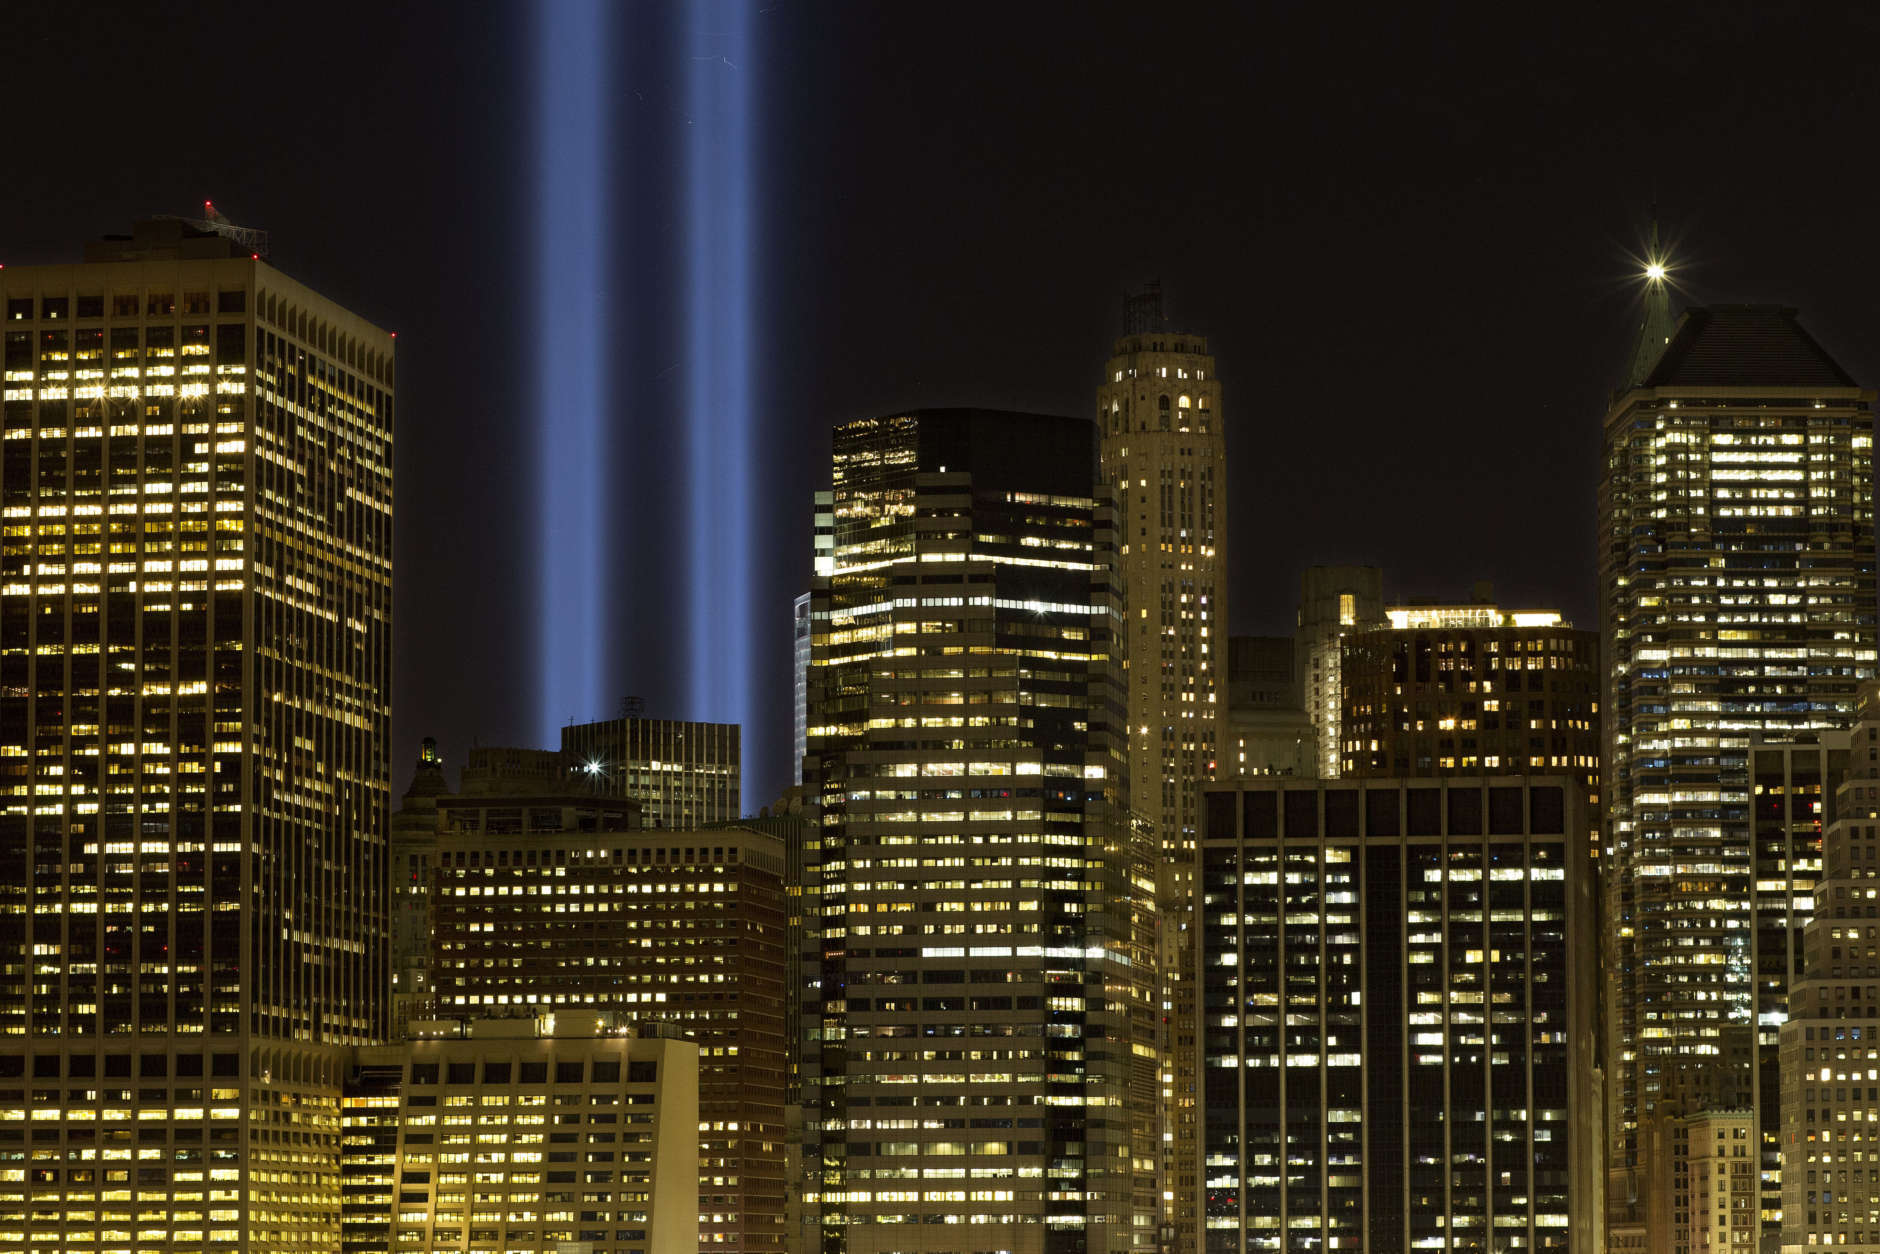 The Tribute in Light rises above the lower Manhattan skyline, Sunday, Sept. 10, 2017, in New York. The two blue pillars of light provide a visual reminder of how the Twin Towers, destroyed in the terrorist attacks of Sept. 11, 2001, once stood above the city skyline. (AP Photo/Mark Lennihan)